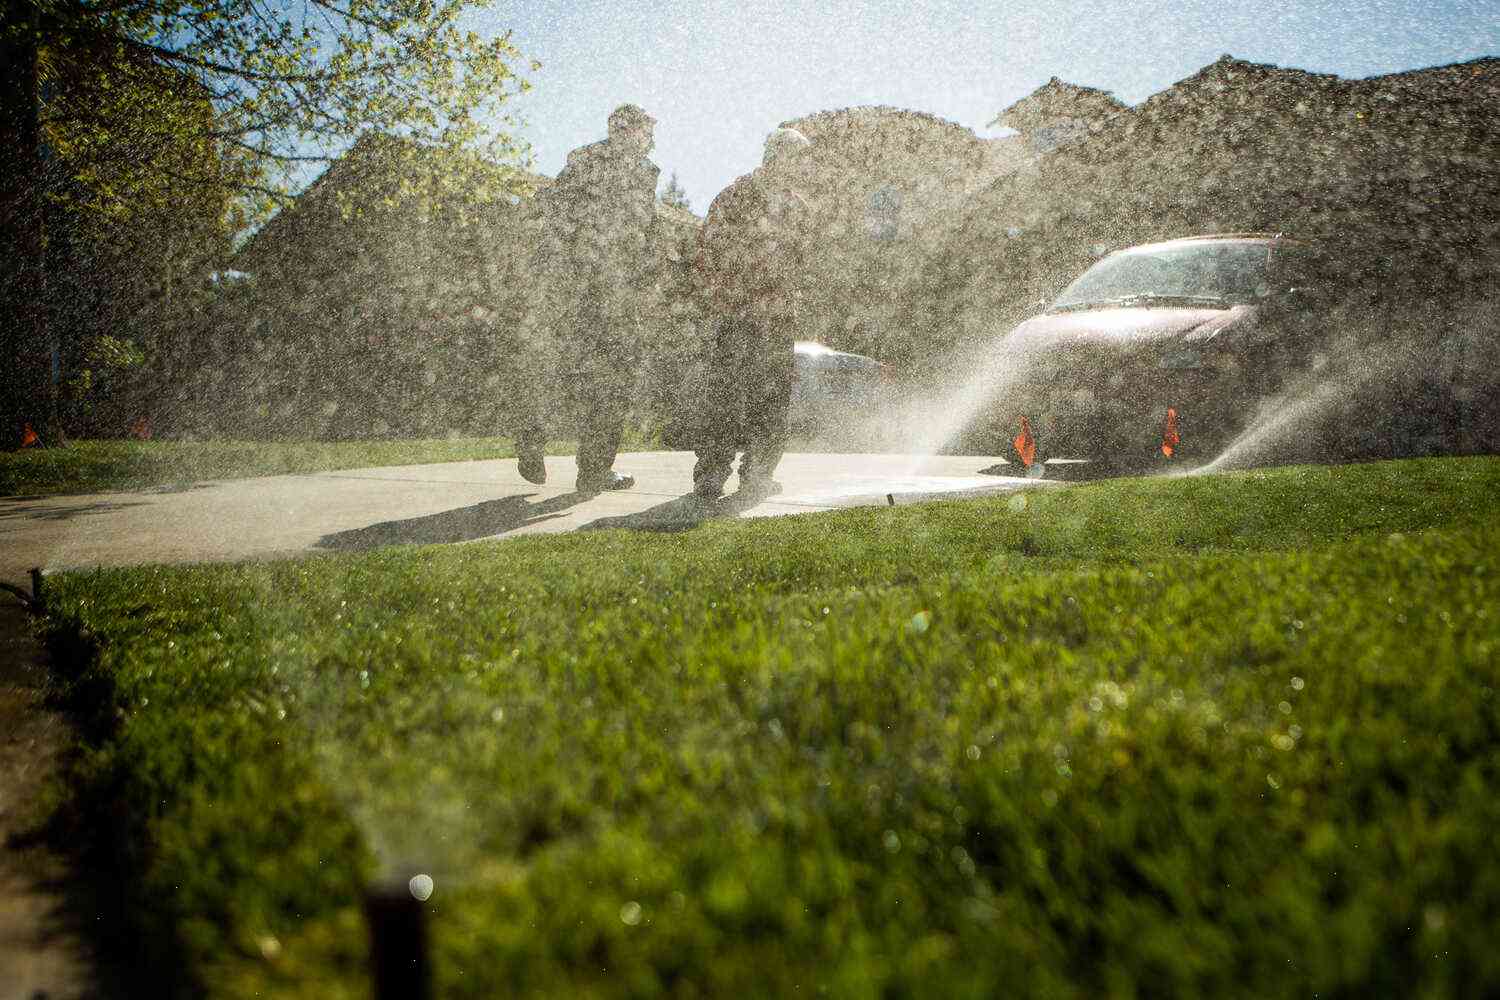 Stuck in a drought? Here’s how utilities are cutting water use — without cutting water supplies.